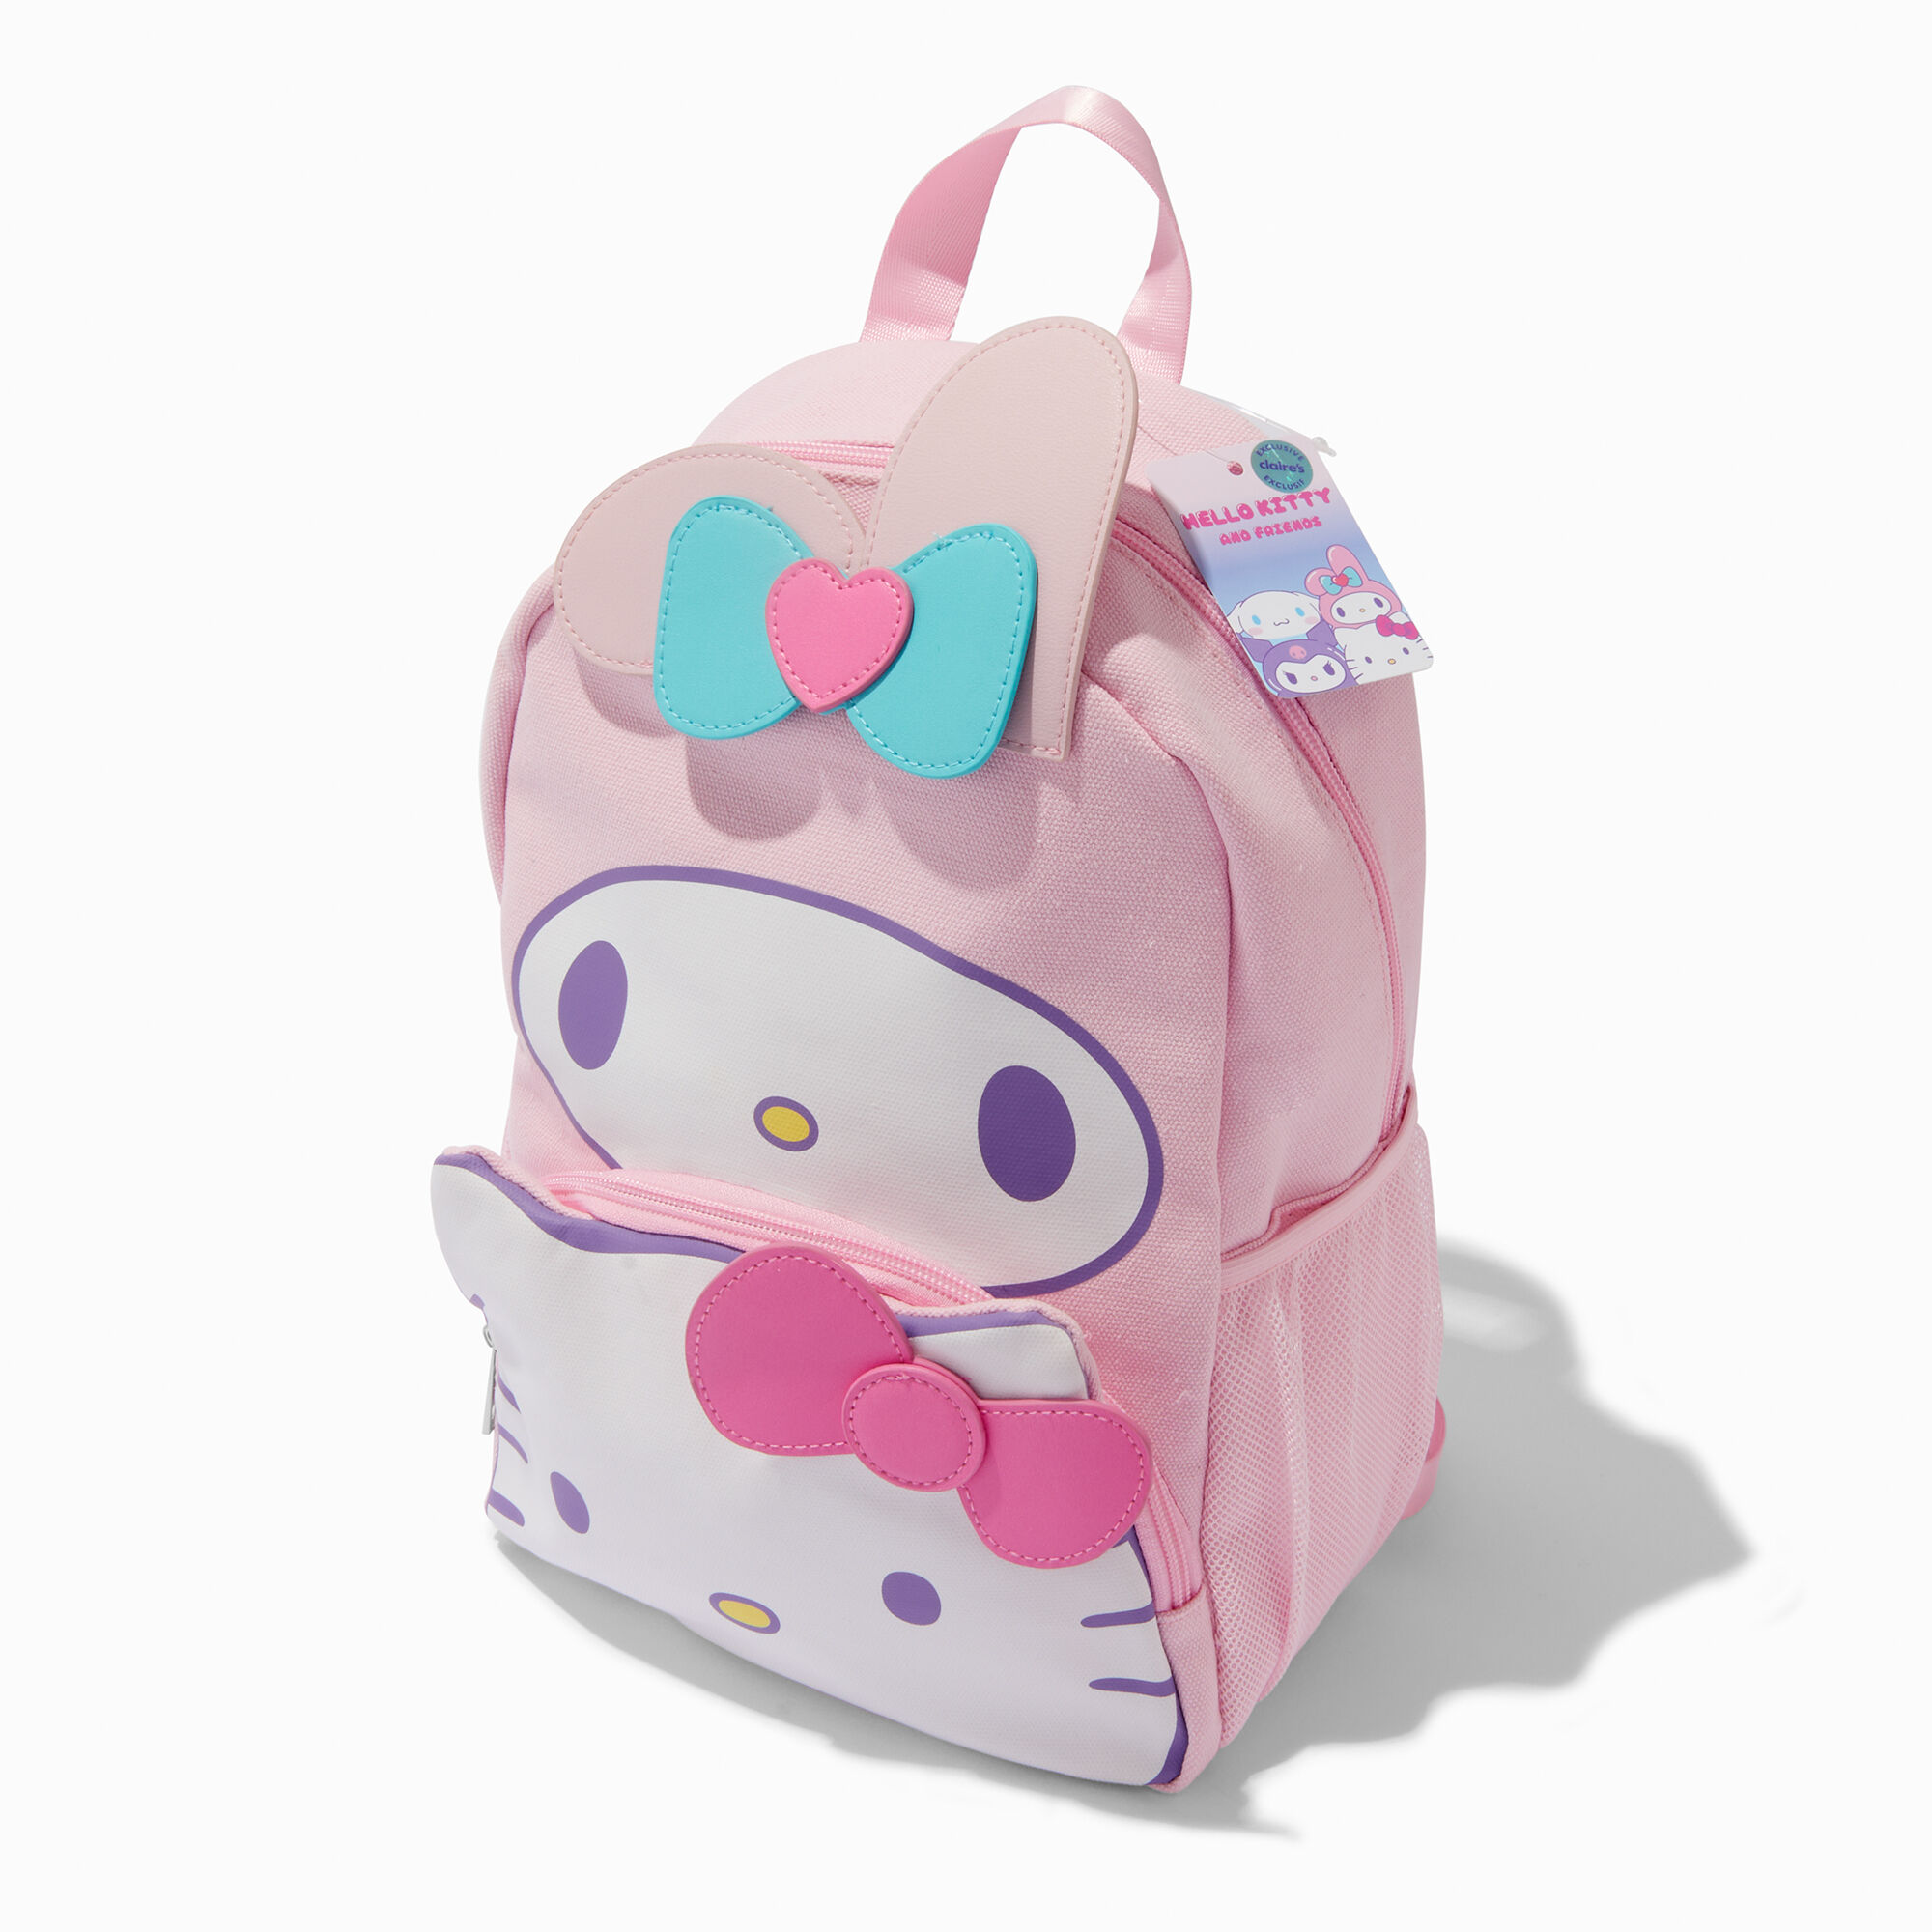 View Hello Kitty And Friends Claires Exclusive Large Backpack information